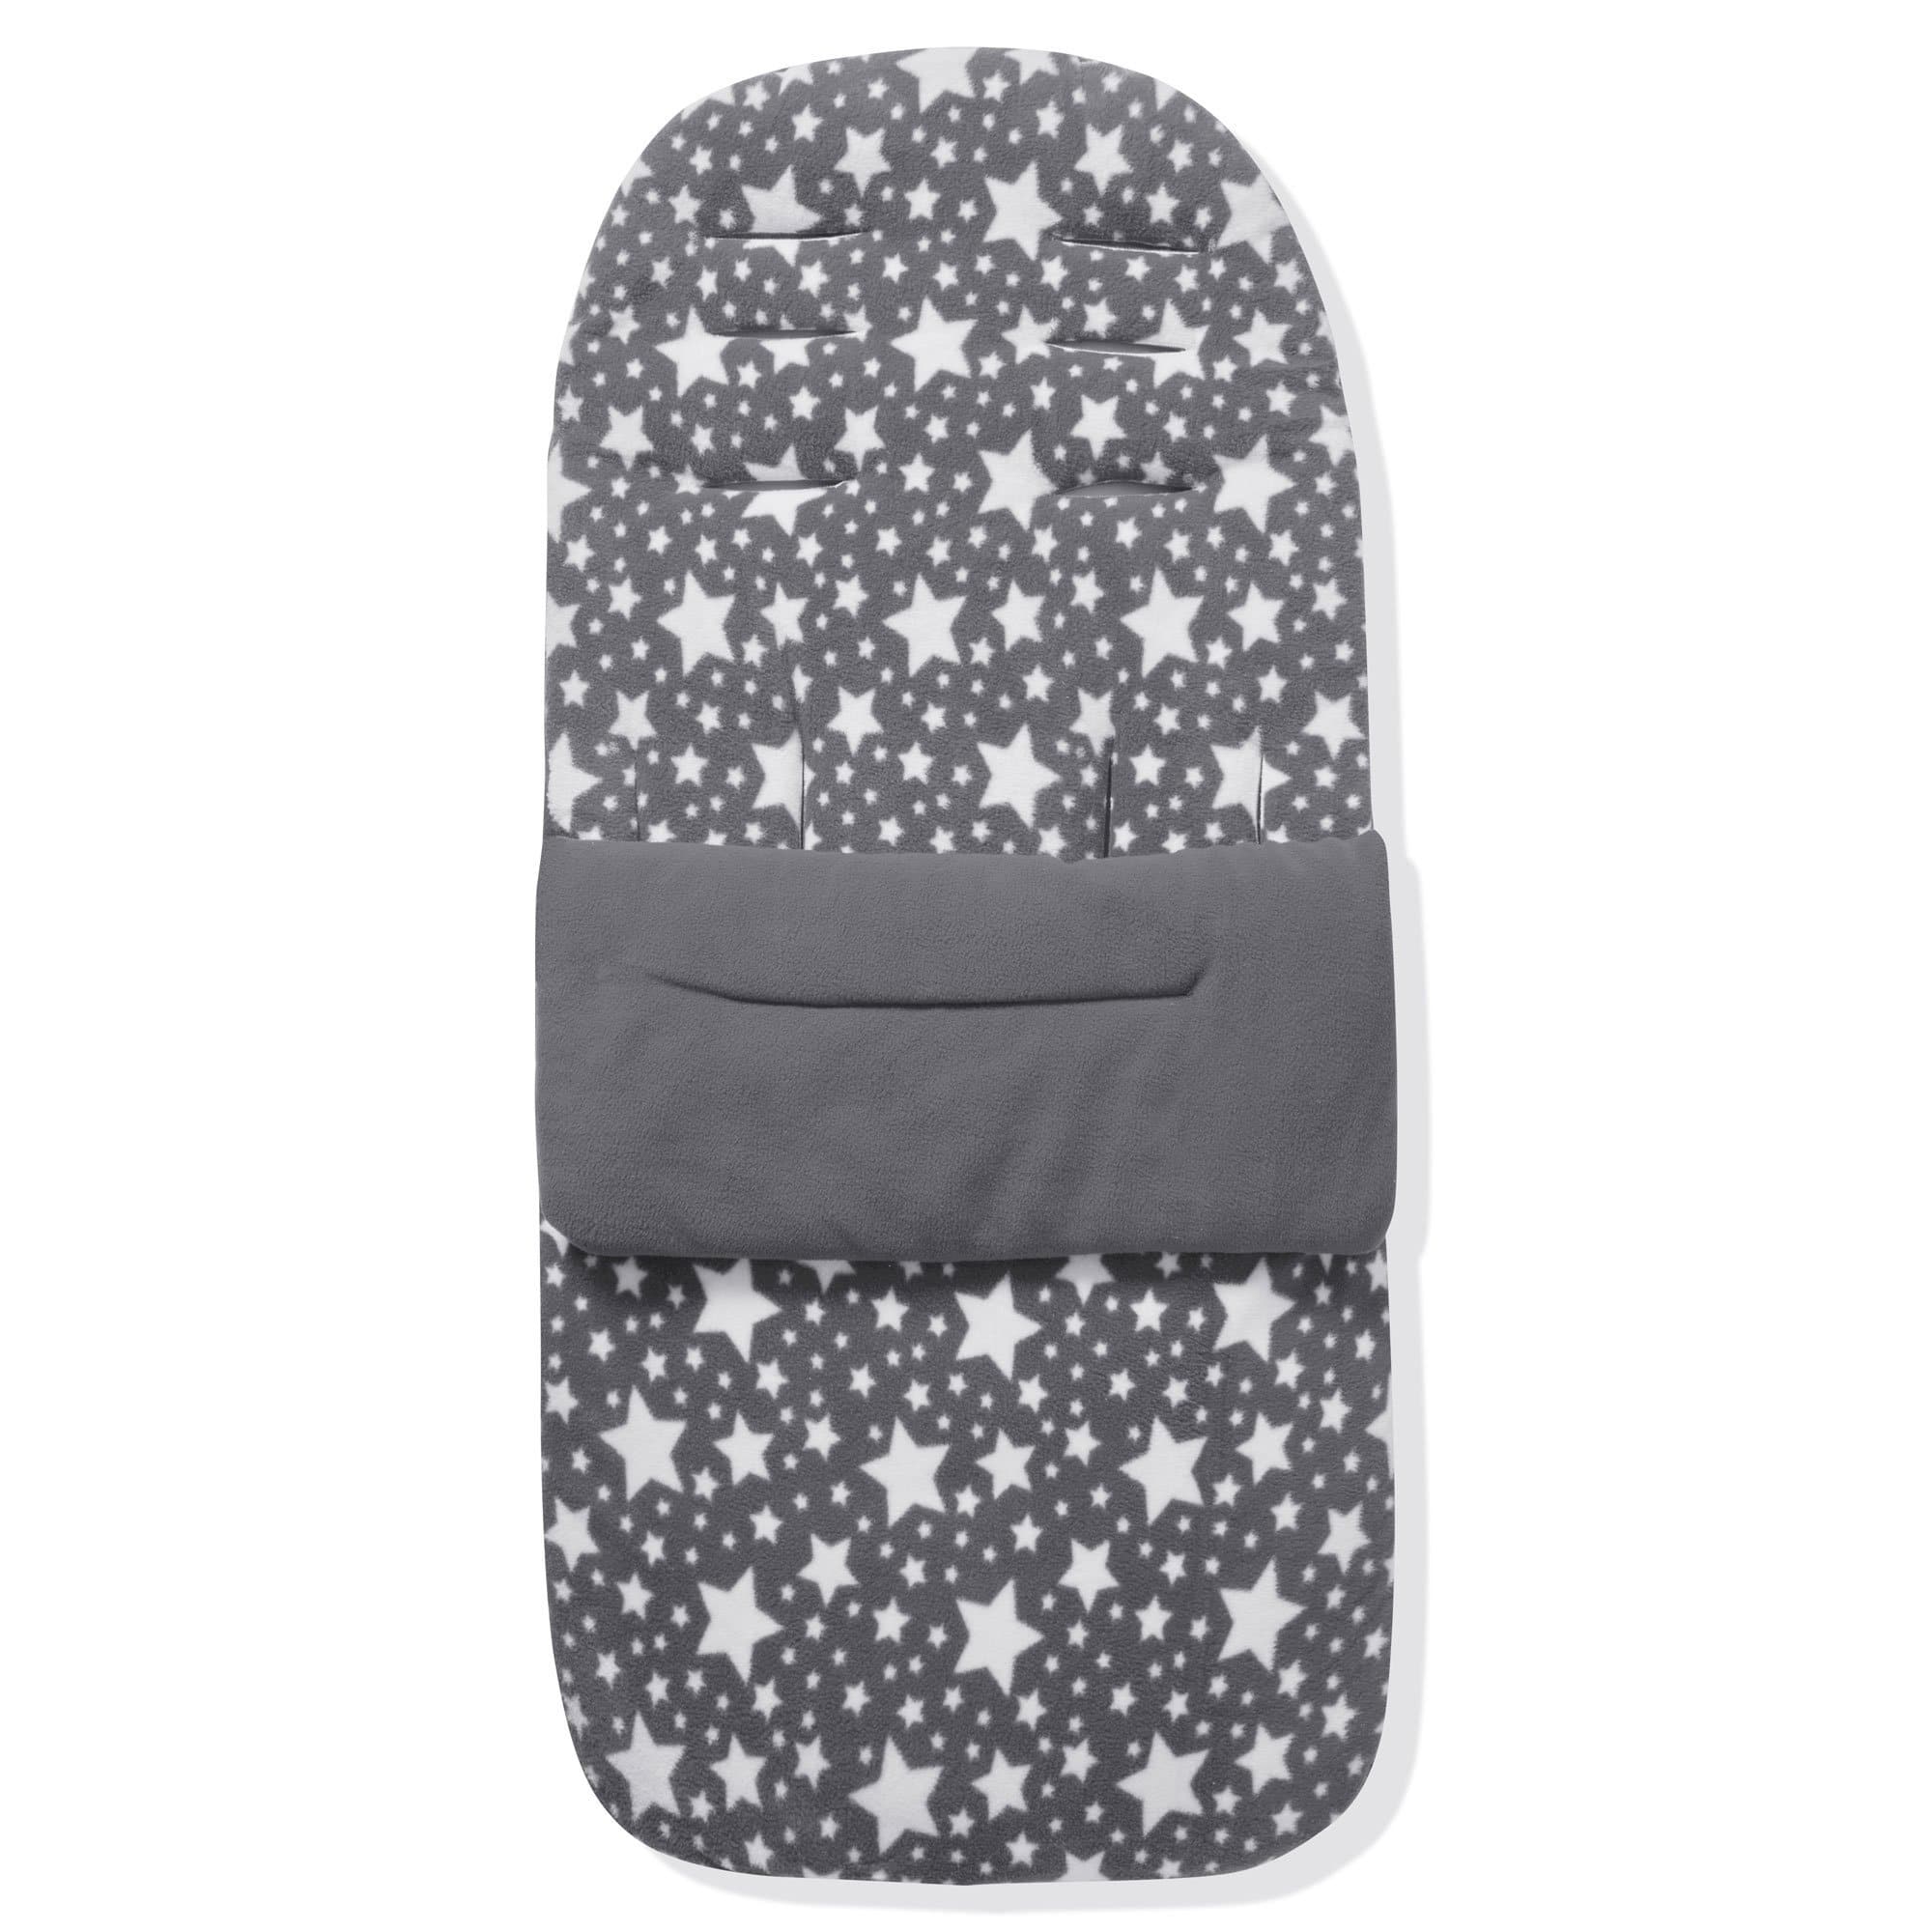 Fleece Footmuff / Cosy Toes Compatible with Phil & Teds - Grey Star / Fits All Models | For Your Little One